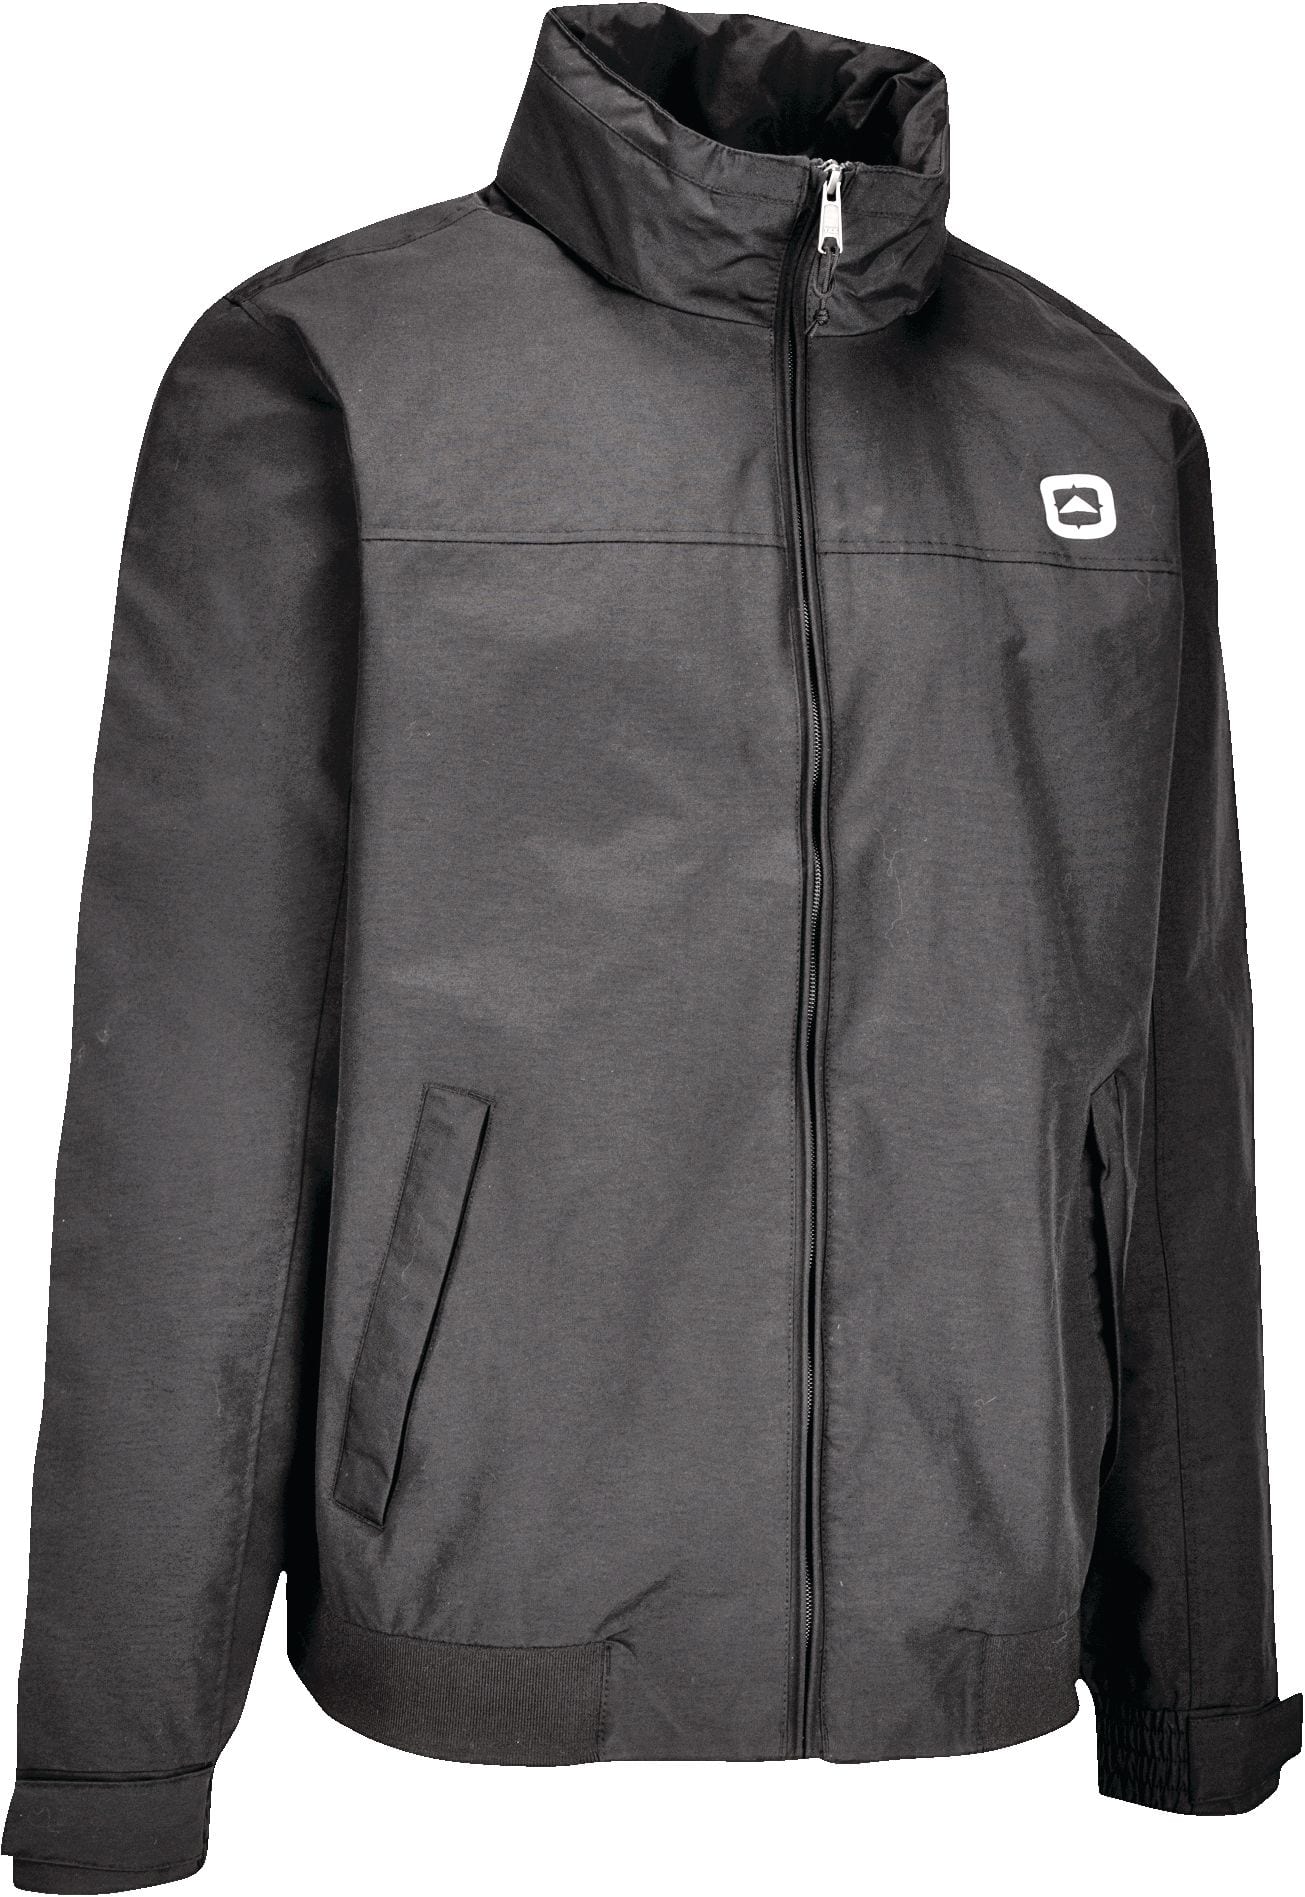 Outbound Men's Larry Nylon Jacket with Water-Repellent, Breathable Shell,  Black